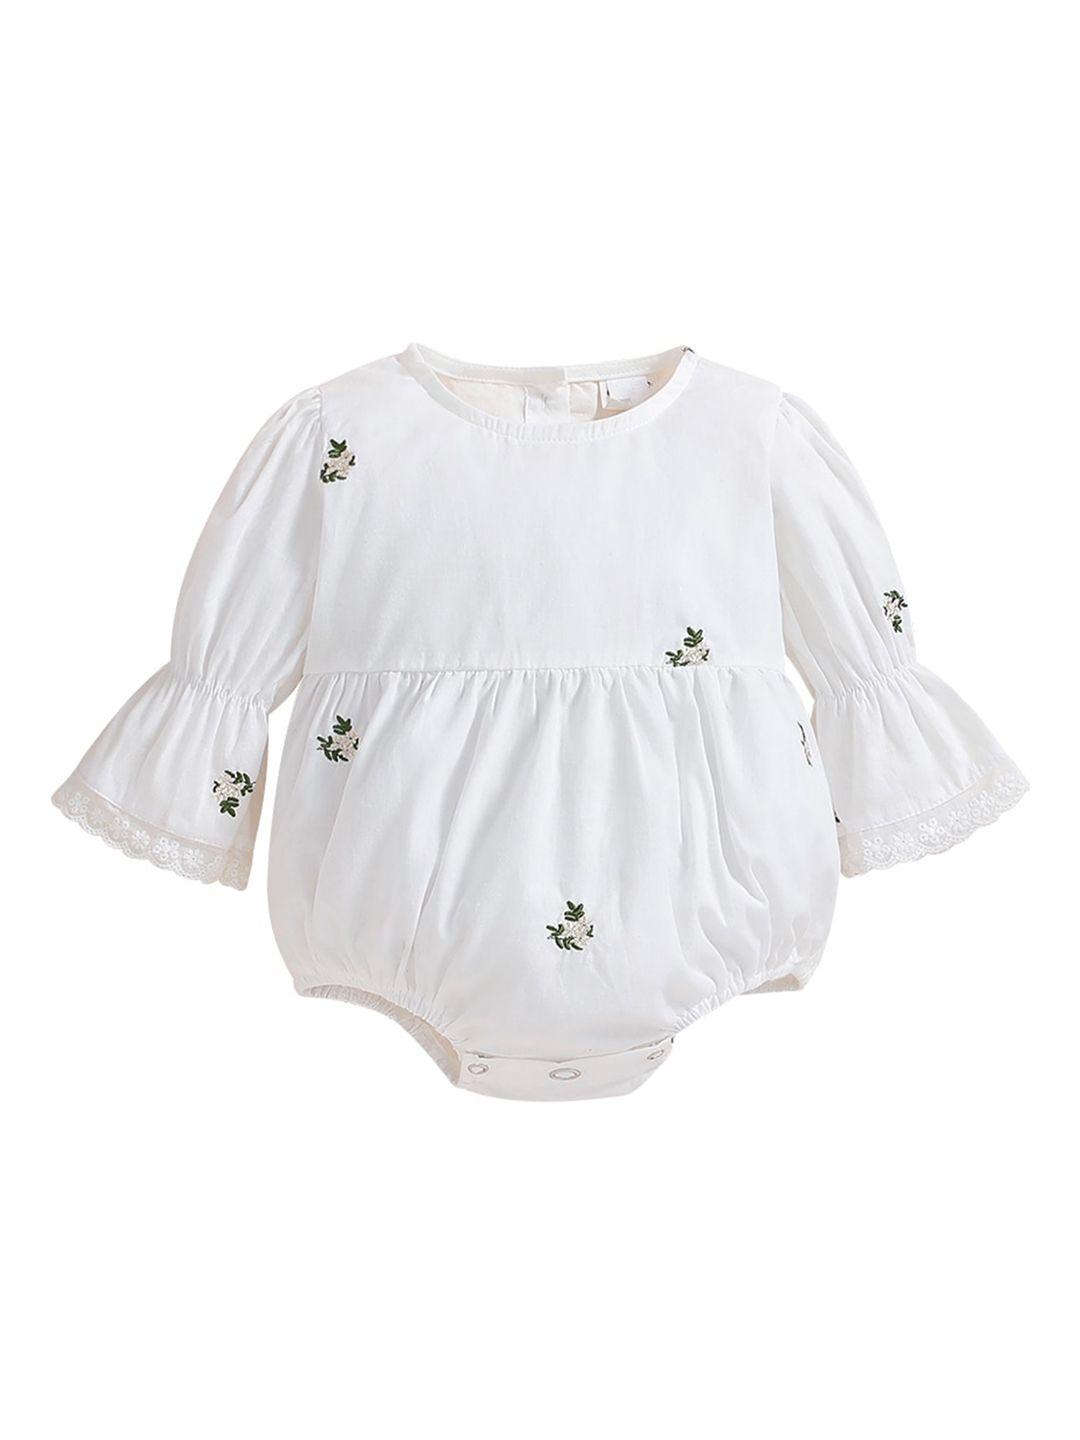 stylecast white infant girls embroidered cotton romper